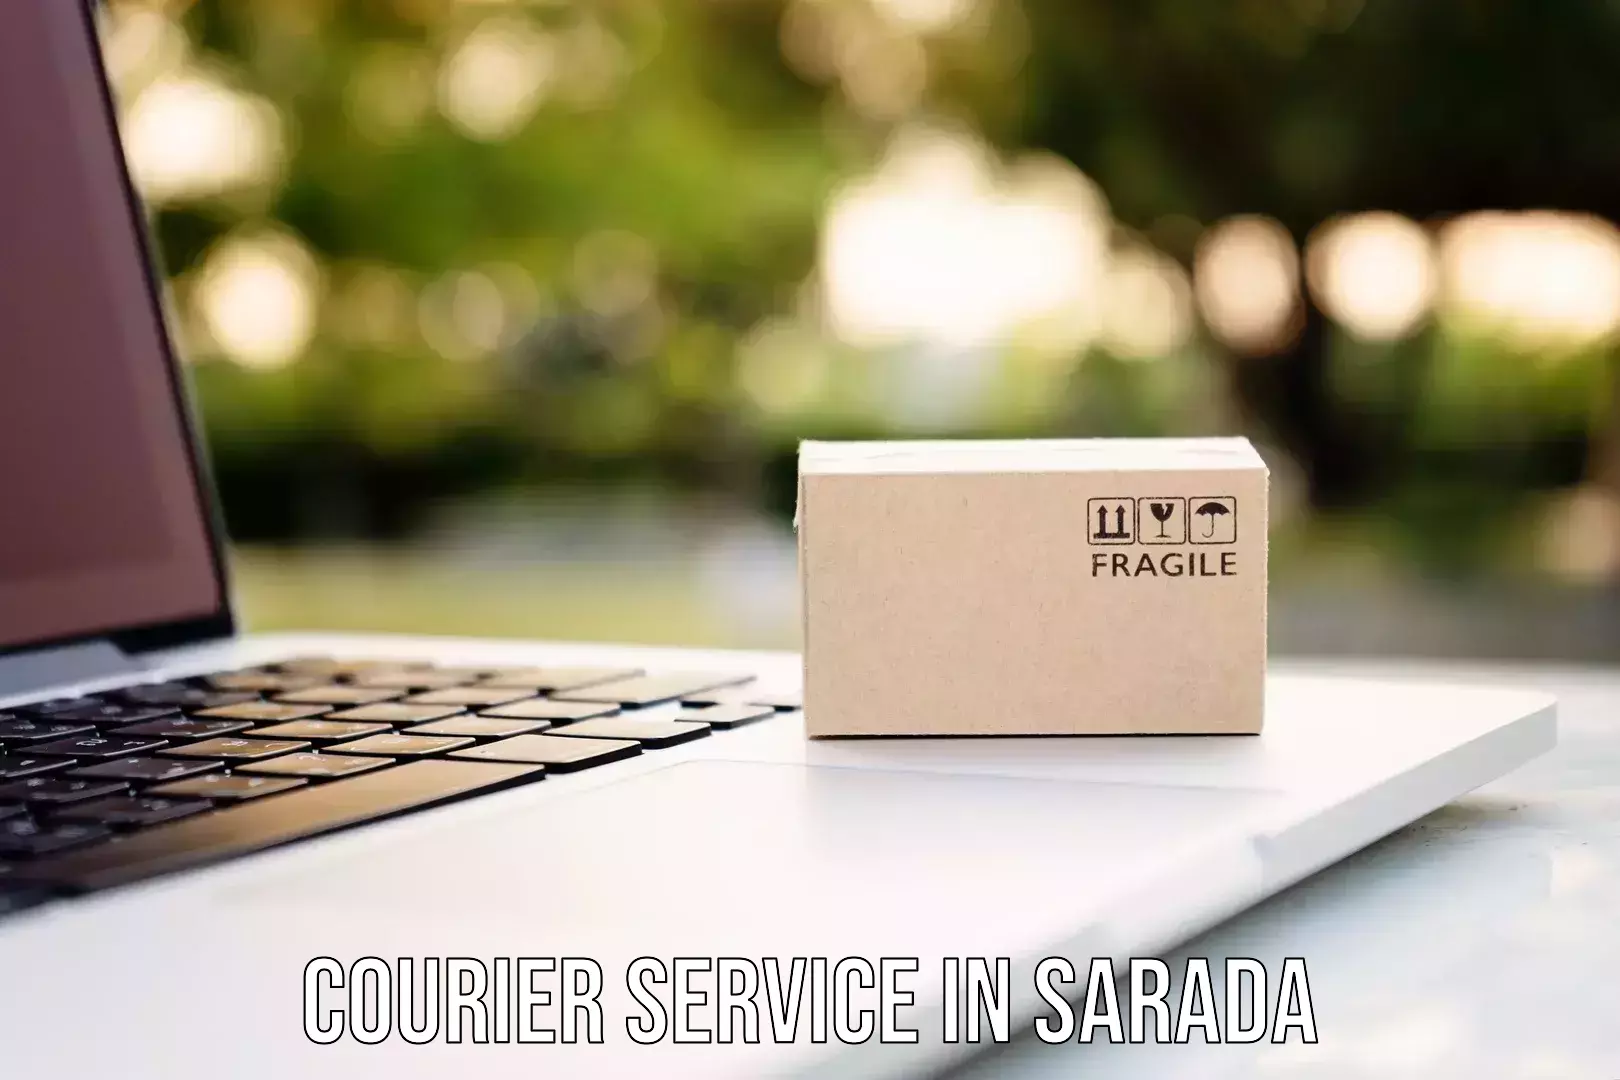 Customer-oriented courier services in Sarada